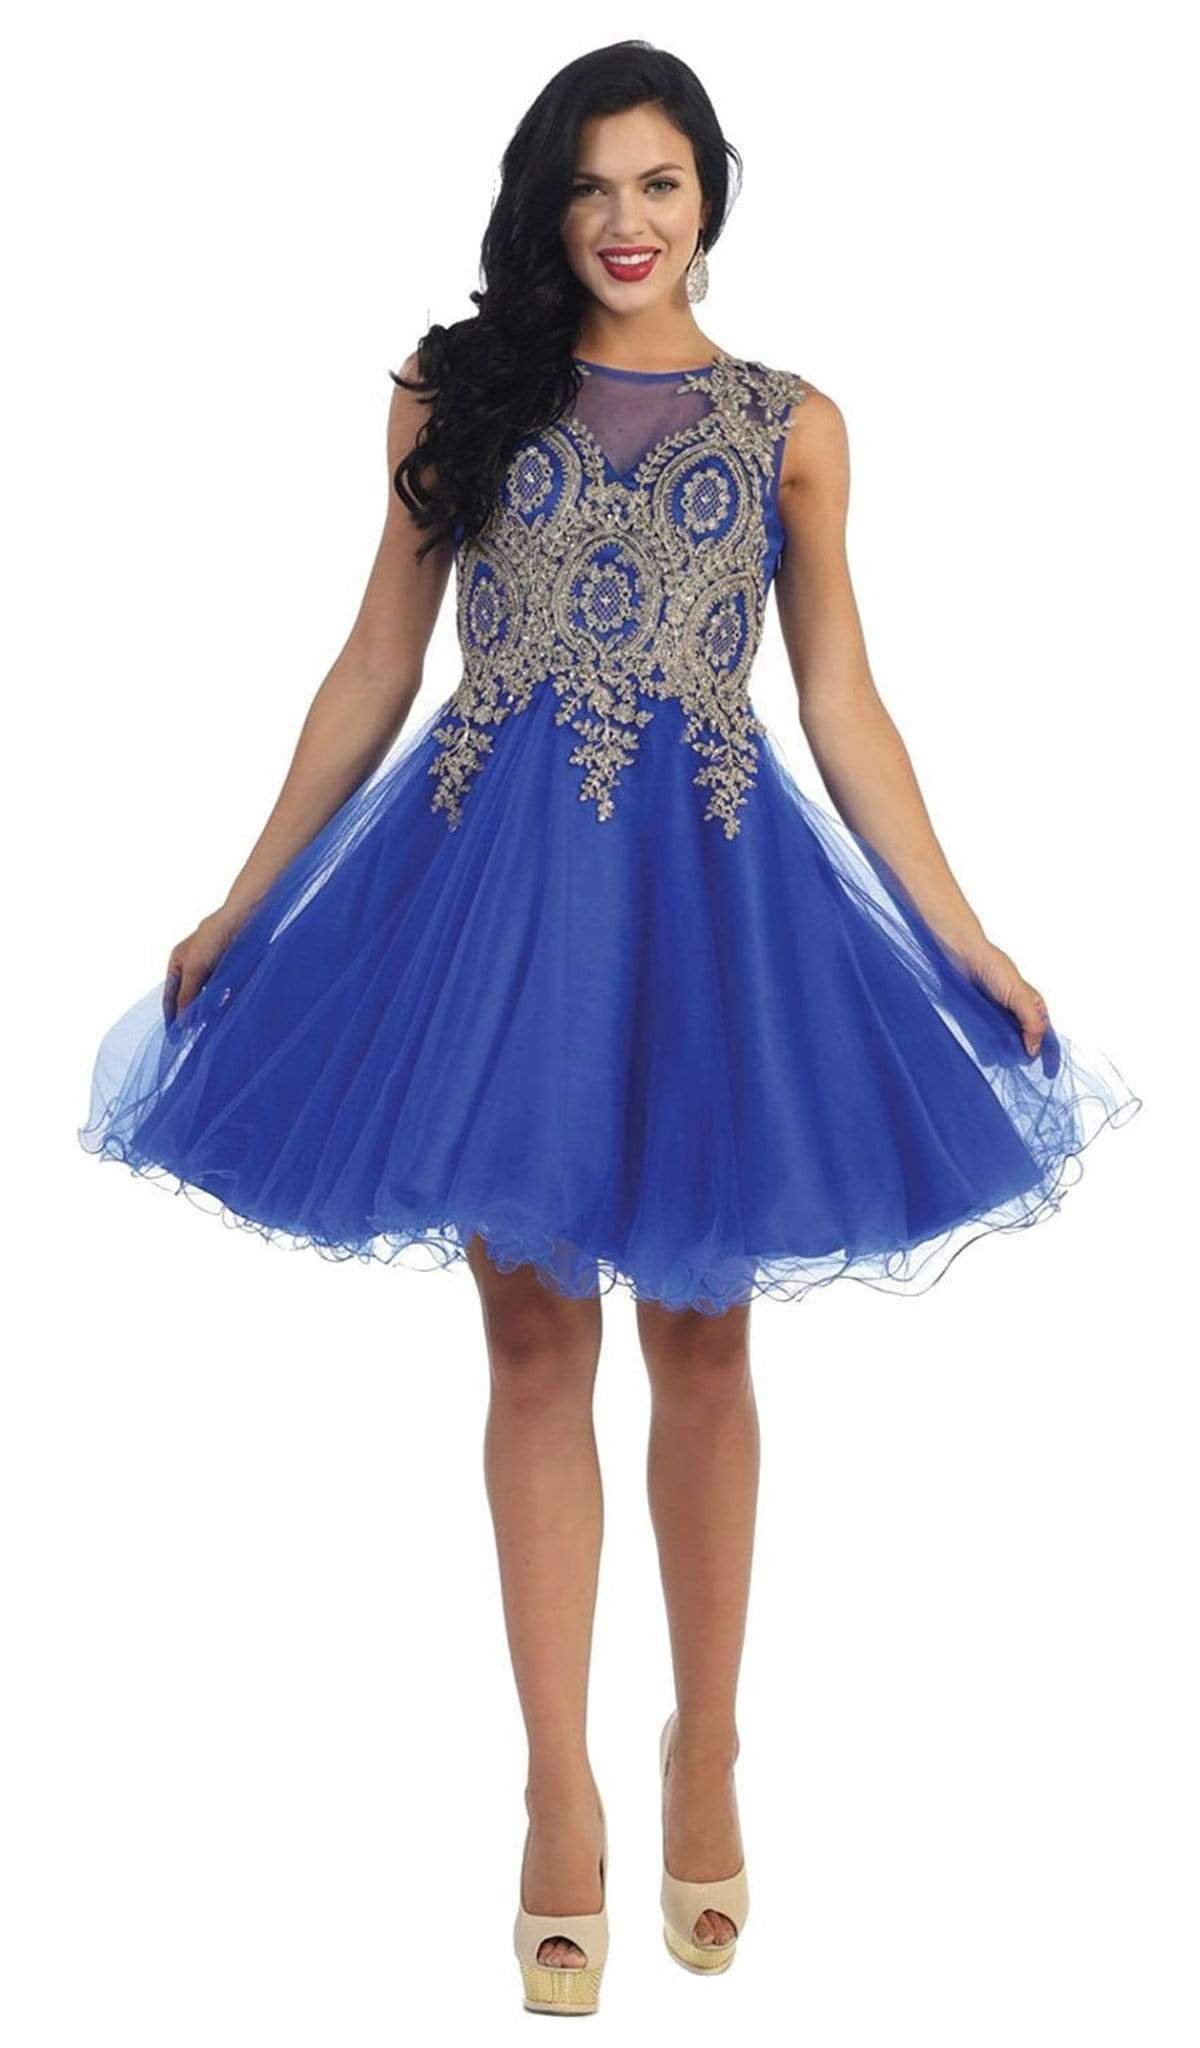 May Queen - Sleeveless Ornate Lace Illusion Cocktail Dress Special Occasion Dress 2 / Royal